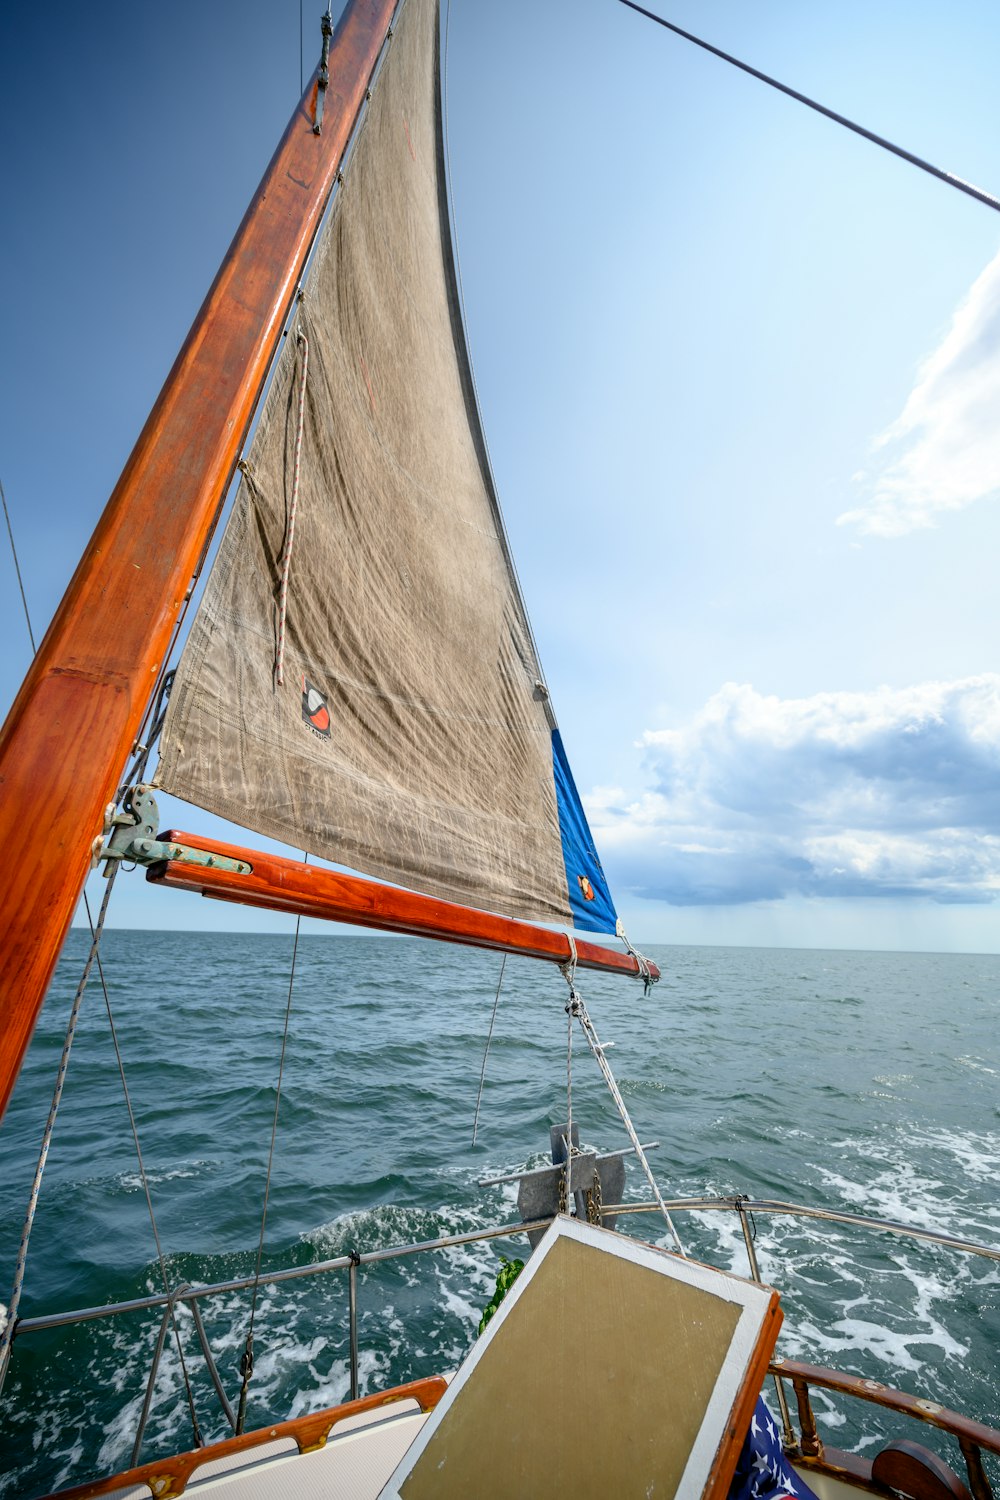 brown and white sailboat on sea under blue sky during daytime